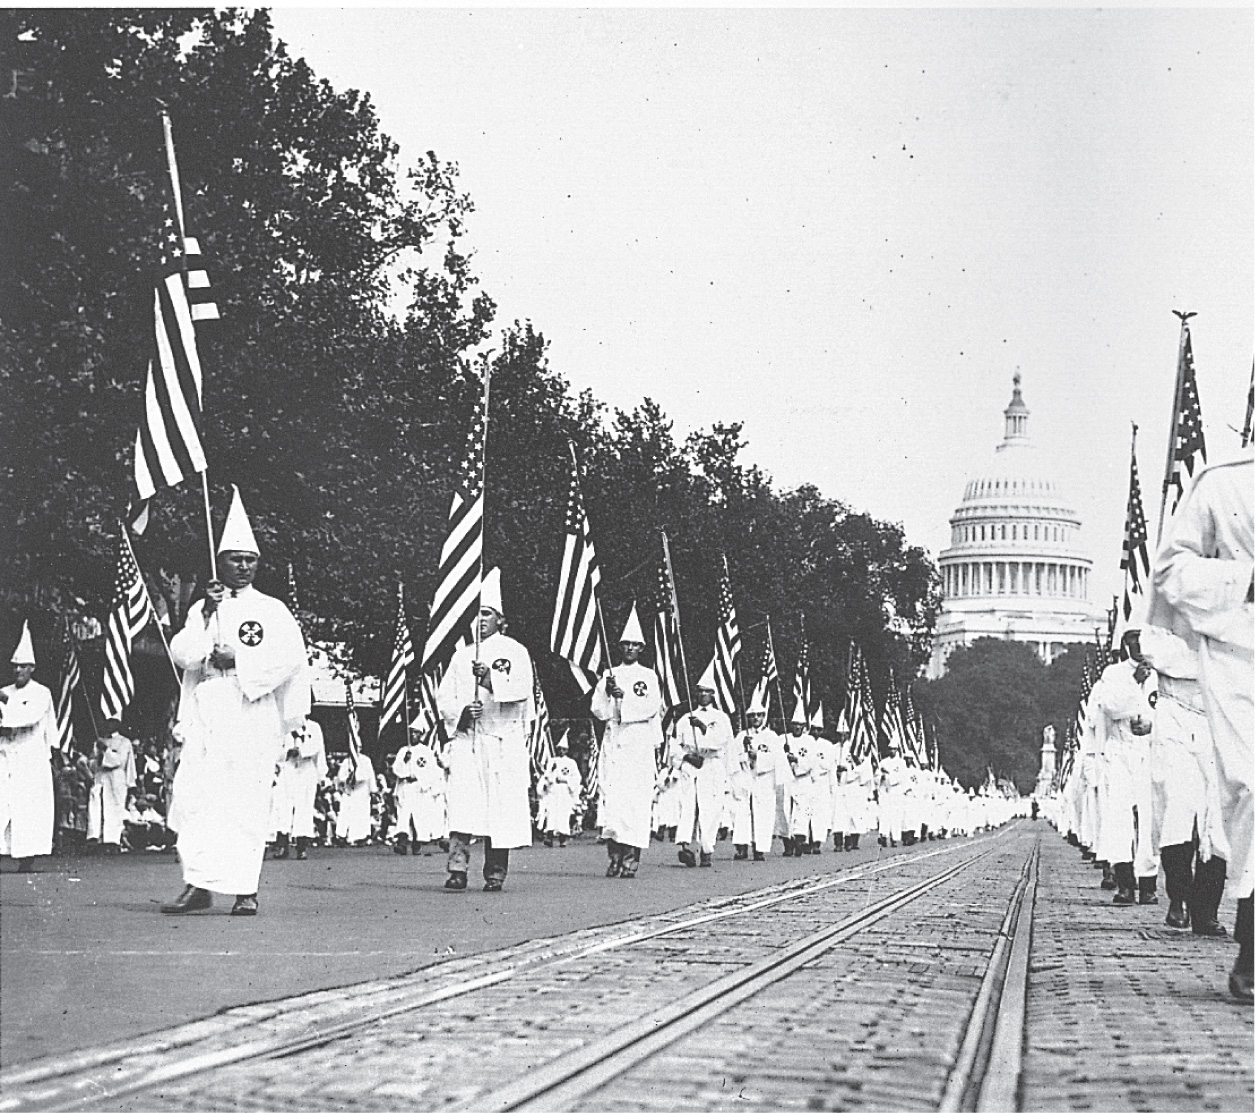 Photo: KKK members wear white robes and conical hats